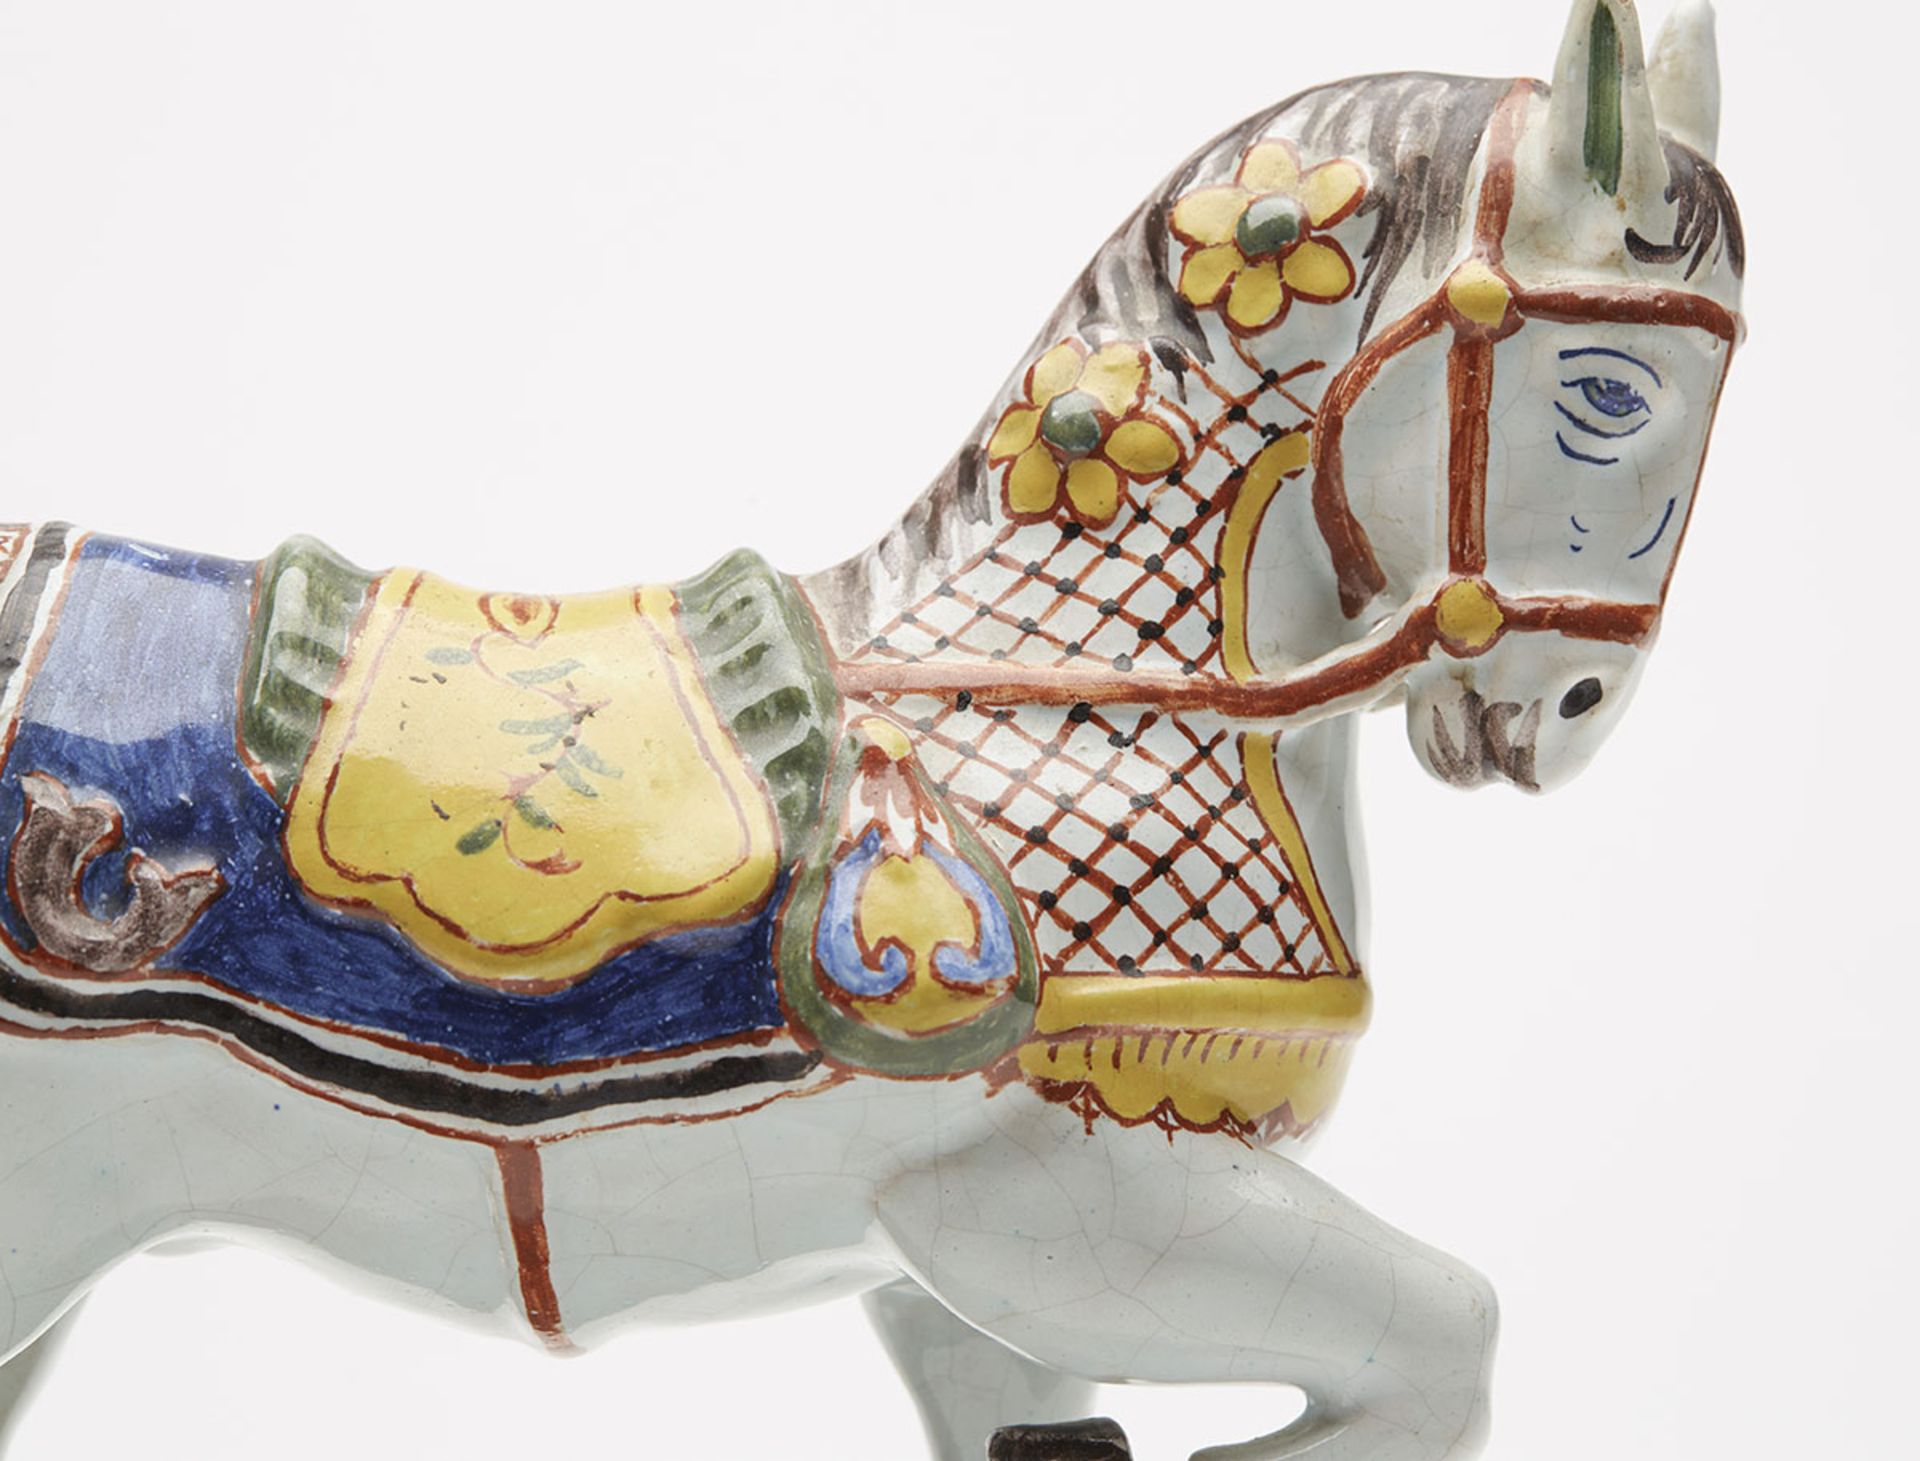 ANTIQUE DELFT POLYCHROME MODEL OF A HORSE 19TH C. - Image 2 of 10